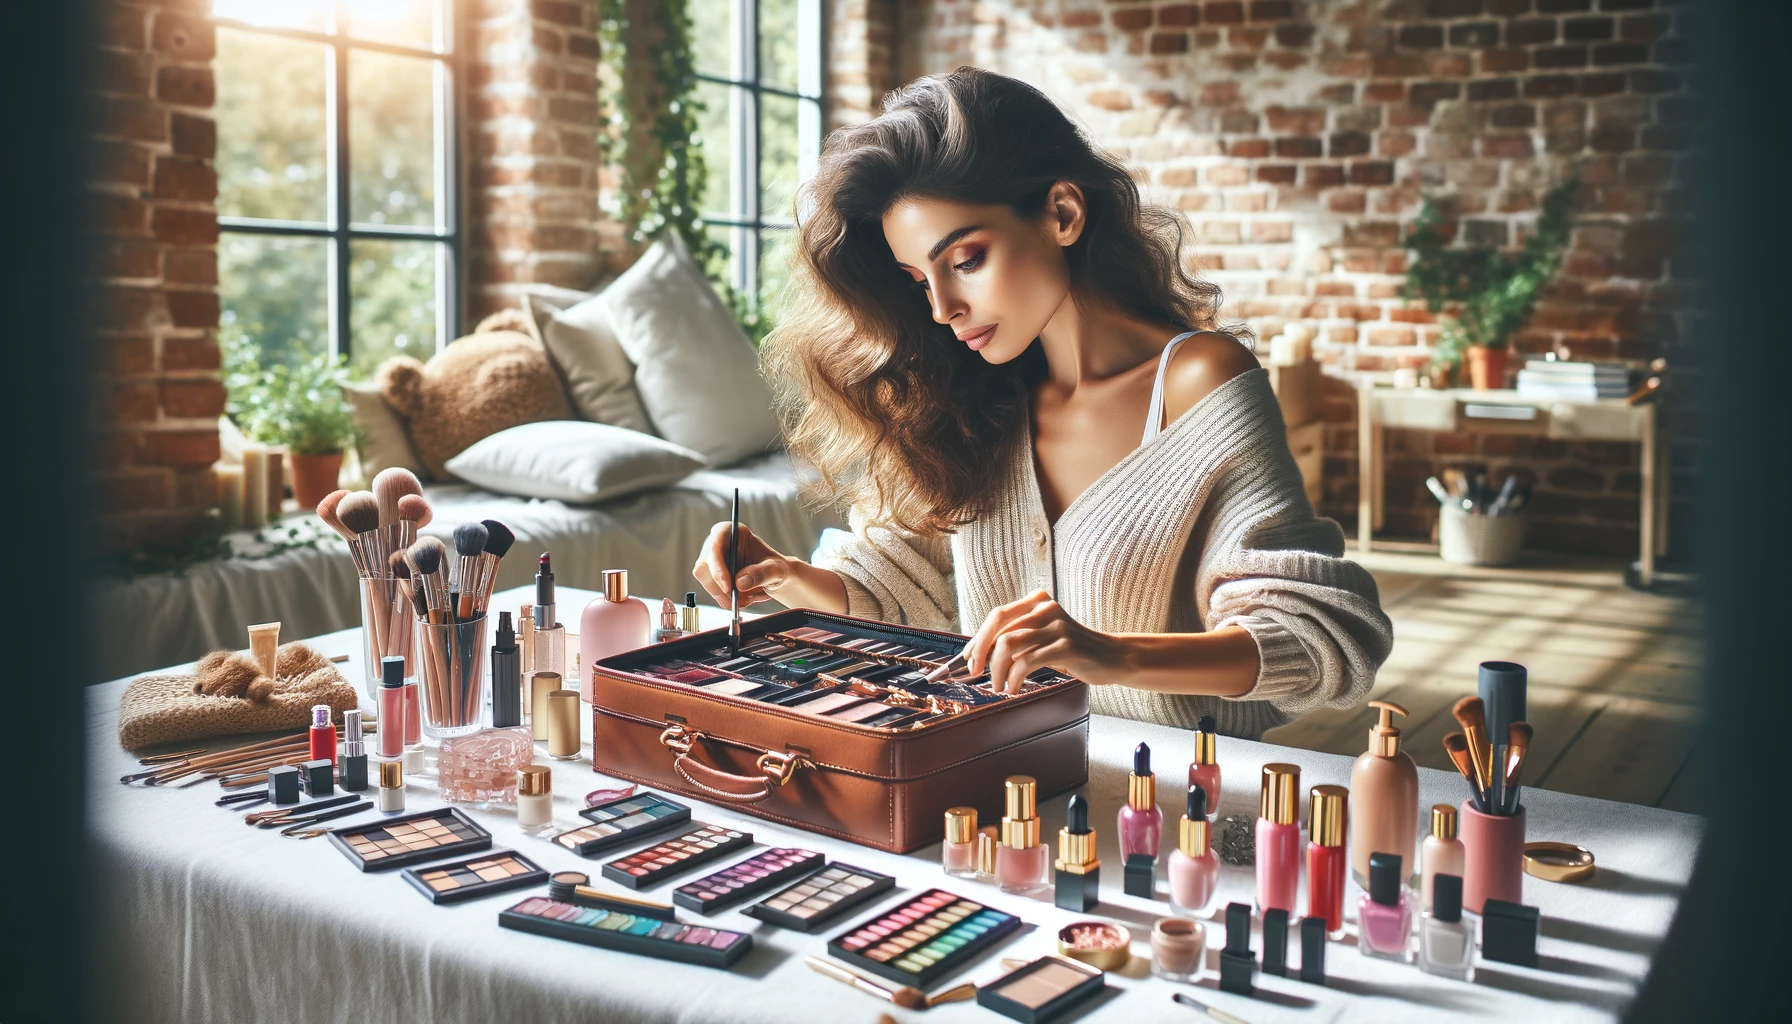 a woman building a kit with beauty products